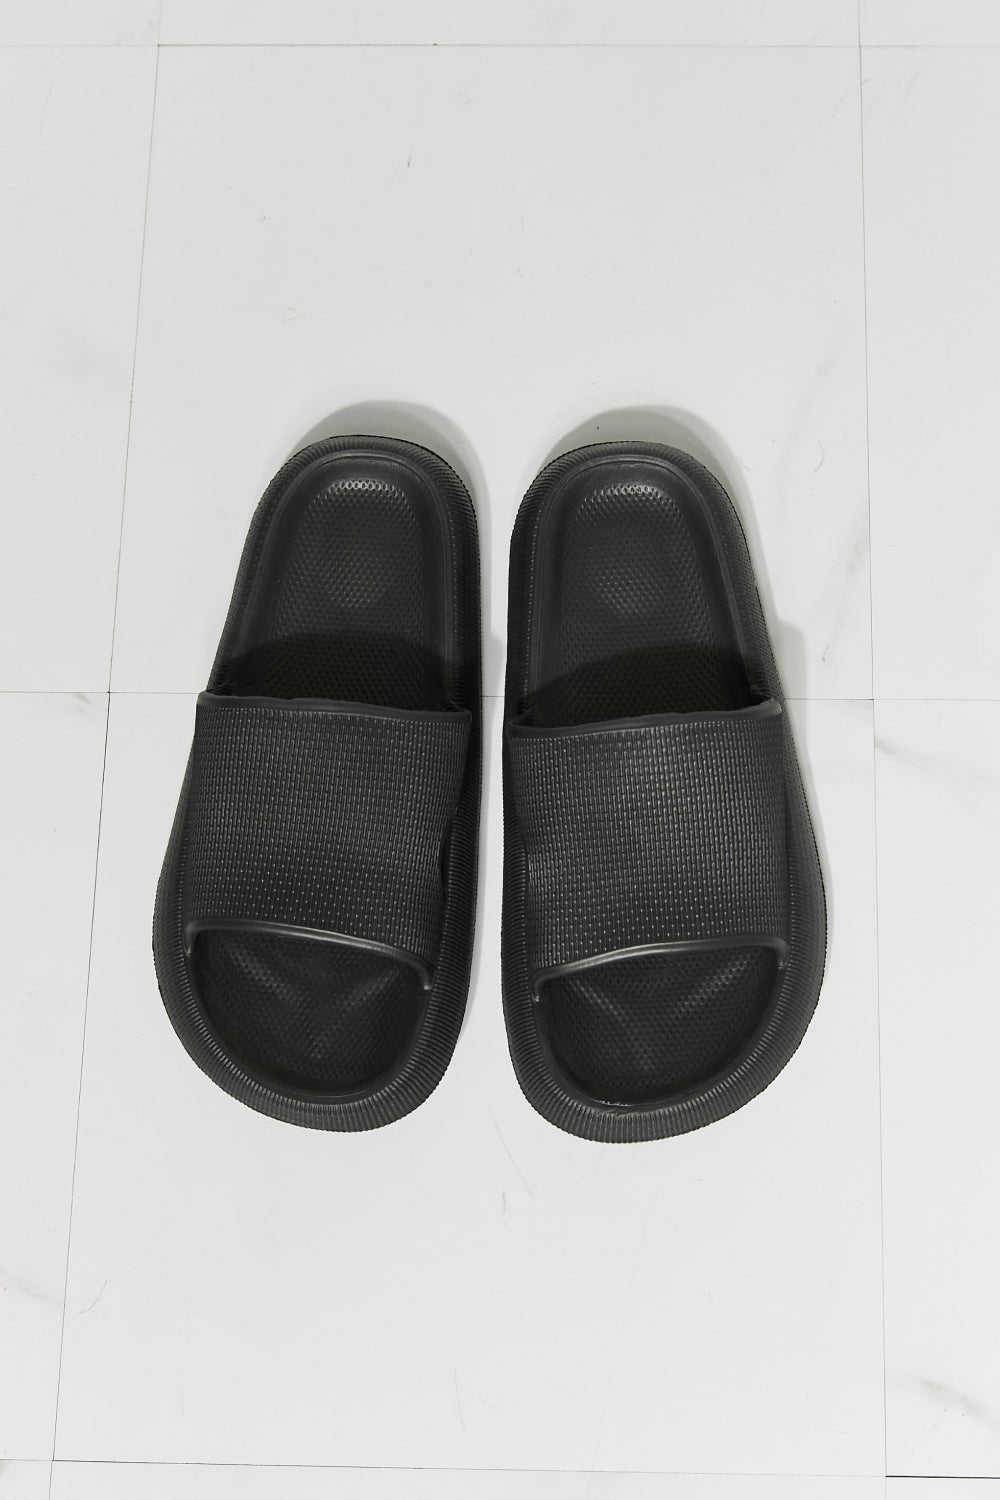 MMShoes Arms Around Me Open Toe Slide in Black - pvmark